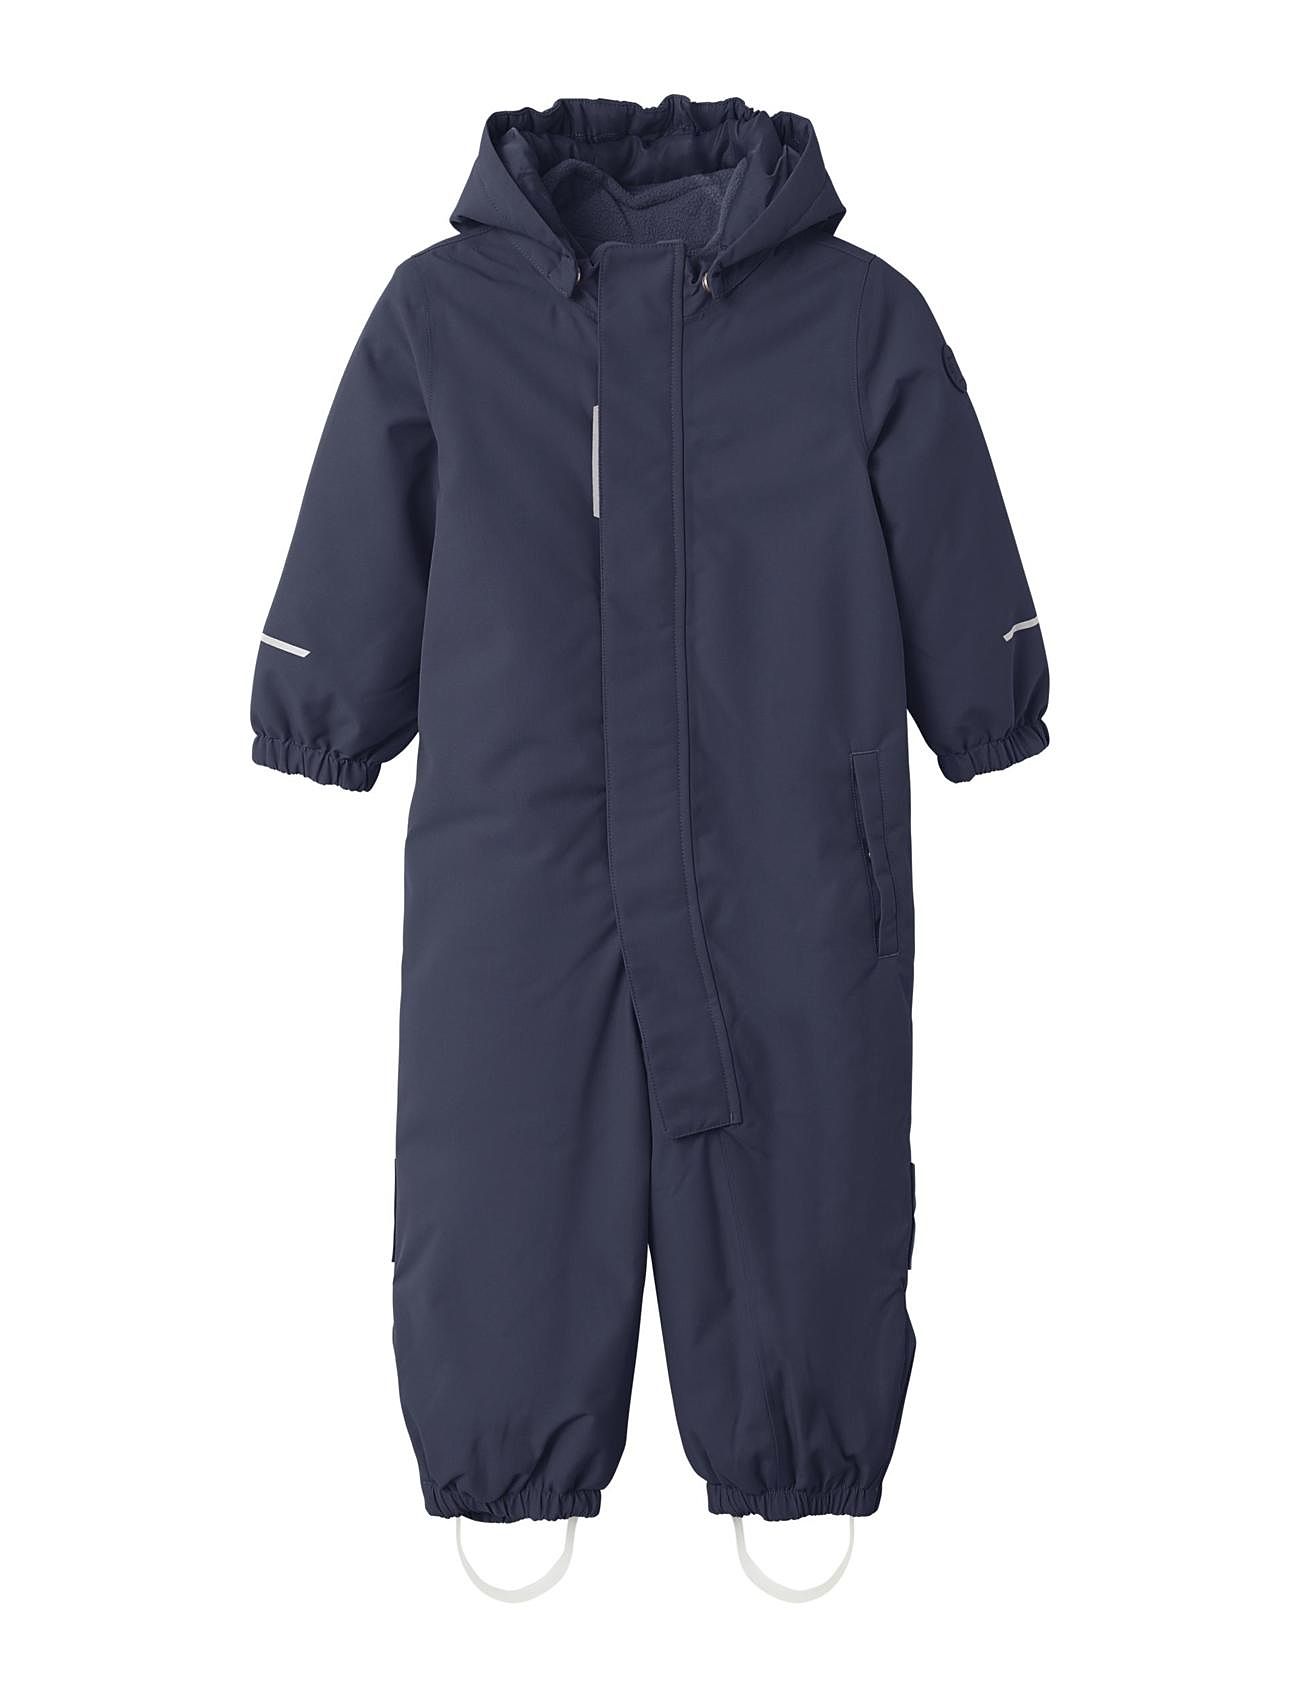 name it - returns Coveralls 1fo online Boozt.com. easy Nmnsnow10 Suit name delivery €. Buy Fast and it at 50.00 Solid from Noos